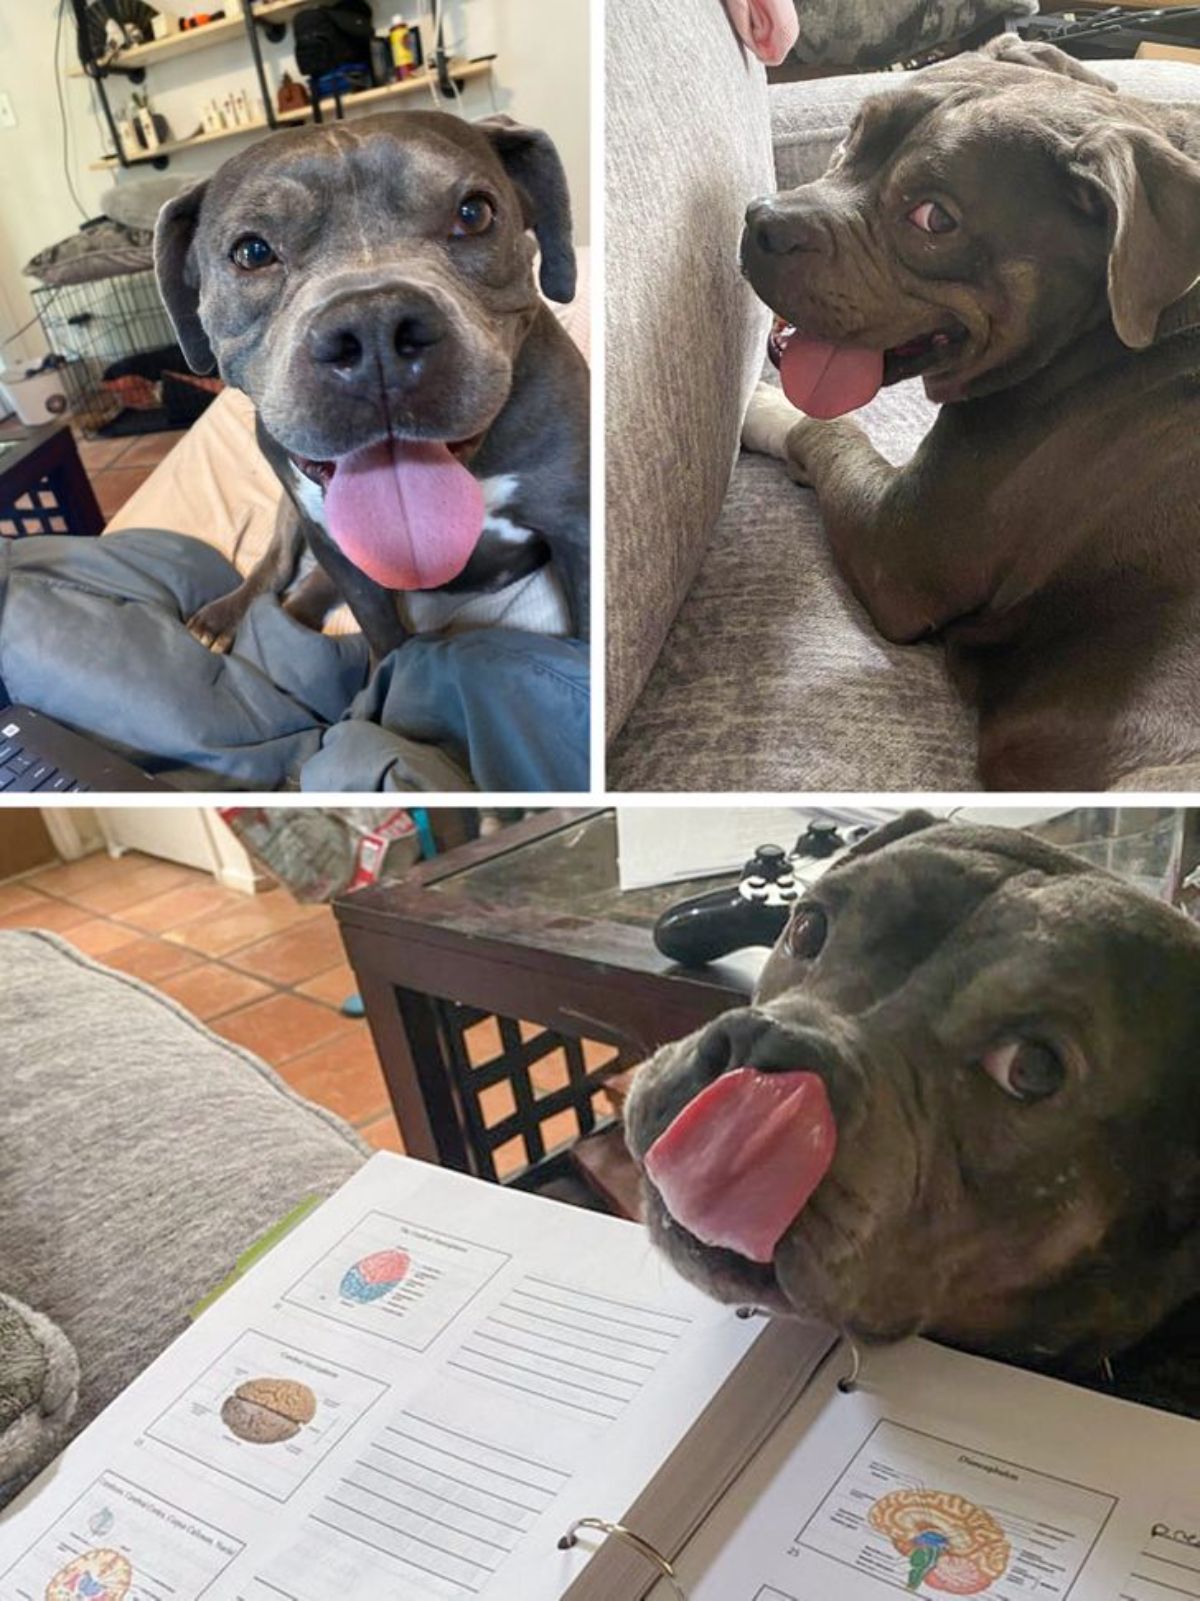 3 photos of a smiling grey and white pitbull